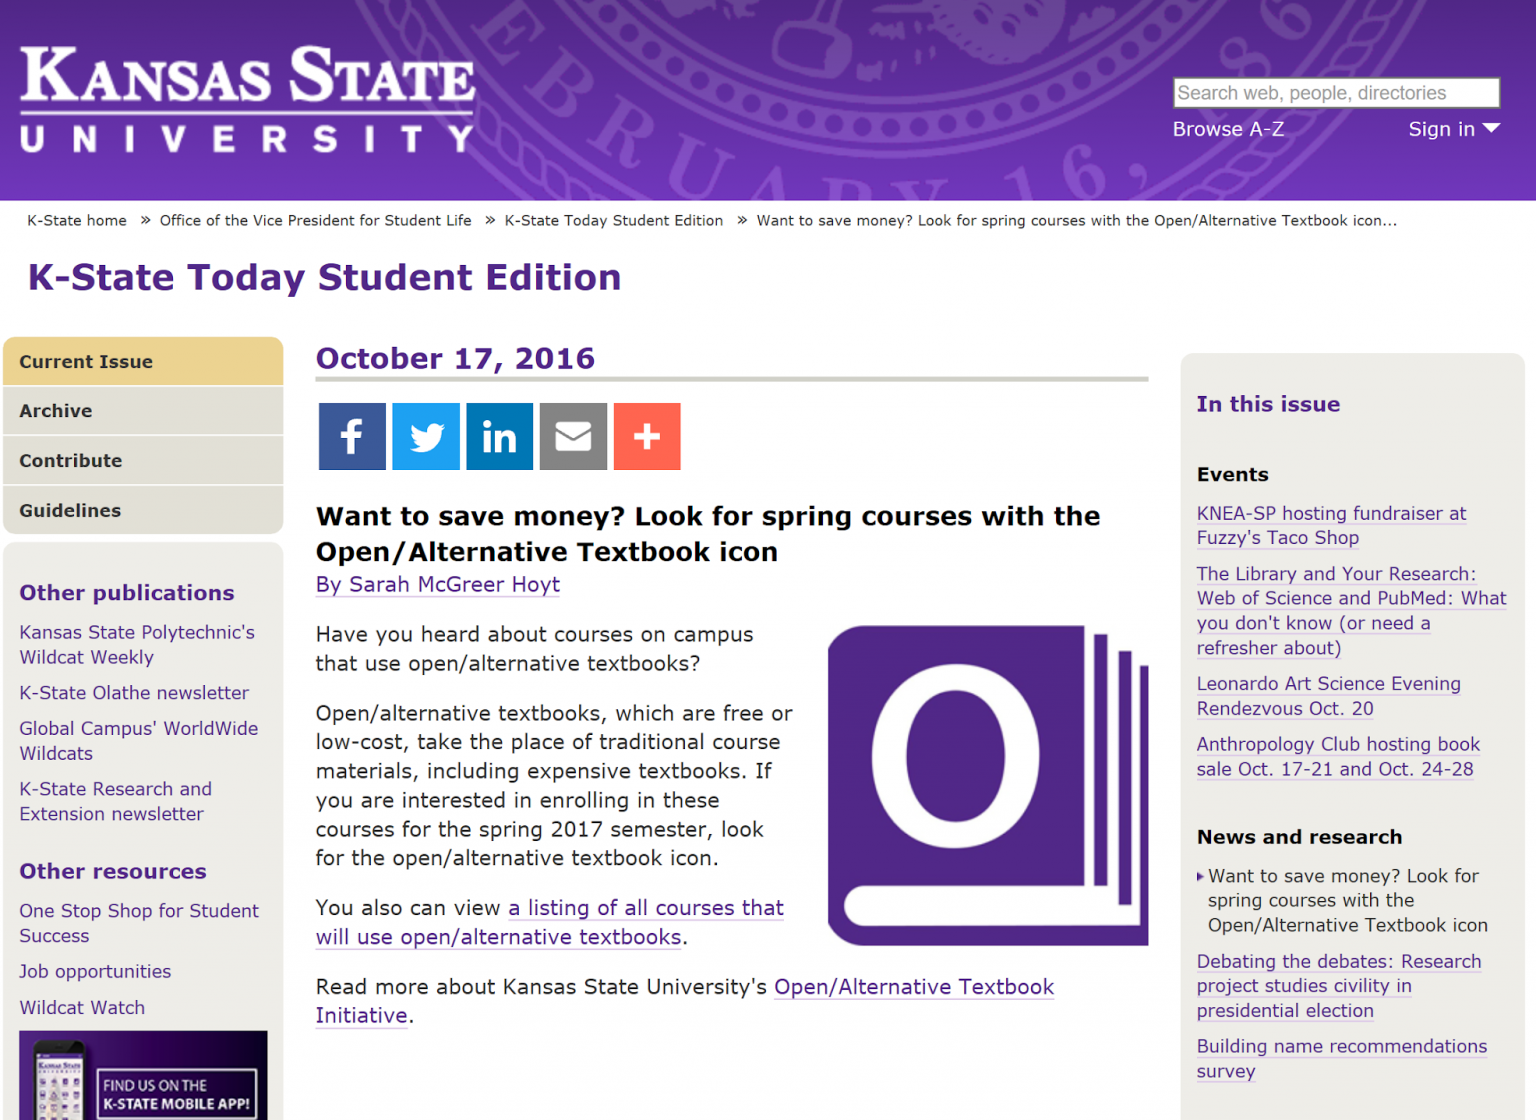 Kansas State University Marking Open and Affordable Courses Best